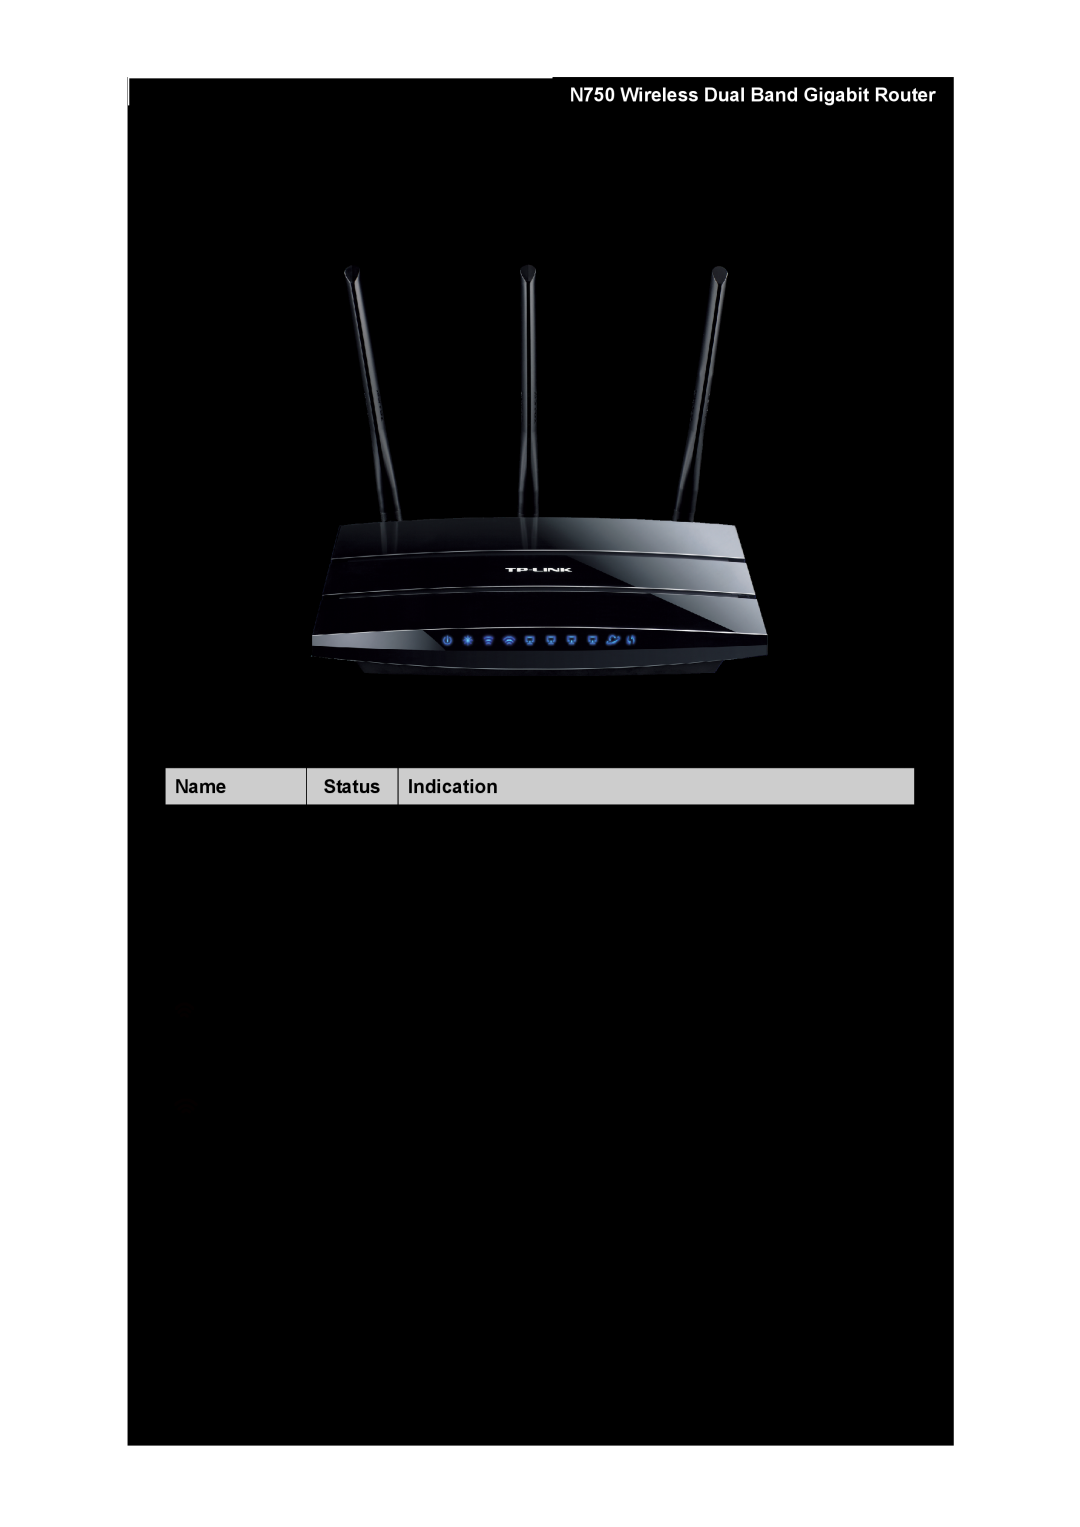 TP-Link manual Panel Layout, The Front Panel, Name, Indication, TL-WDR4300 N750 Wireless Dual Band Gigabit Router 